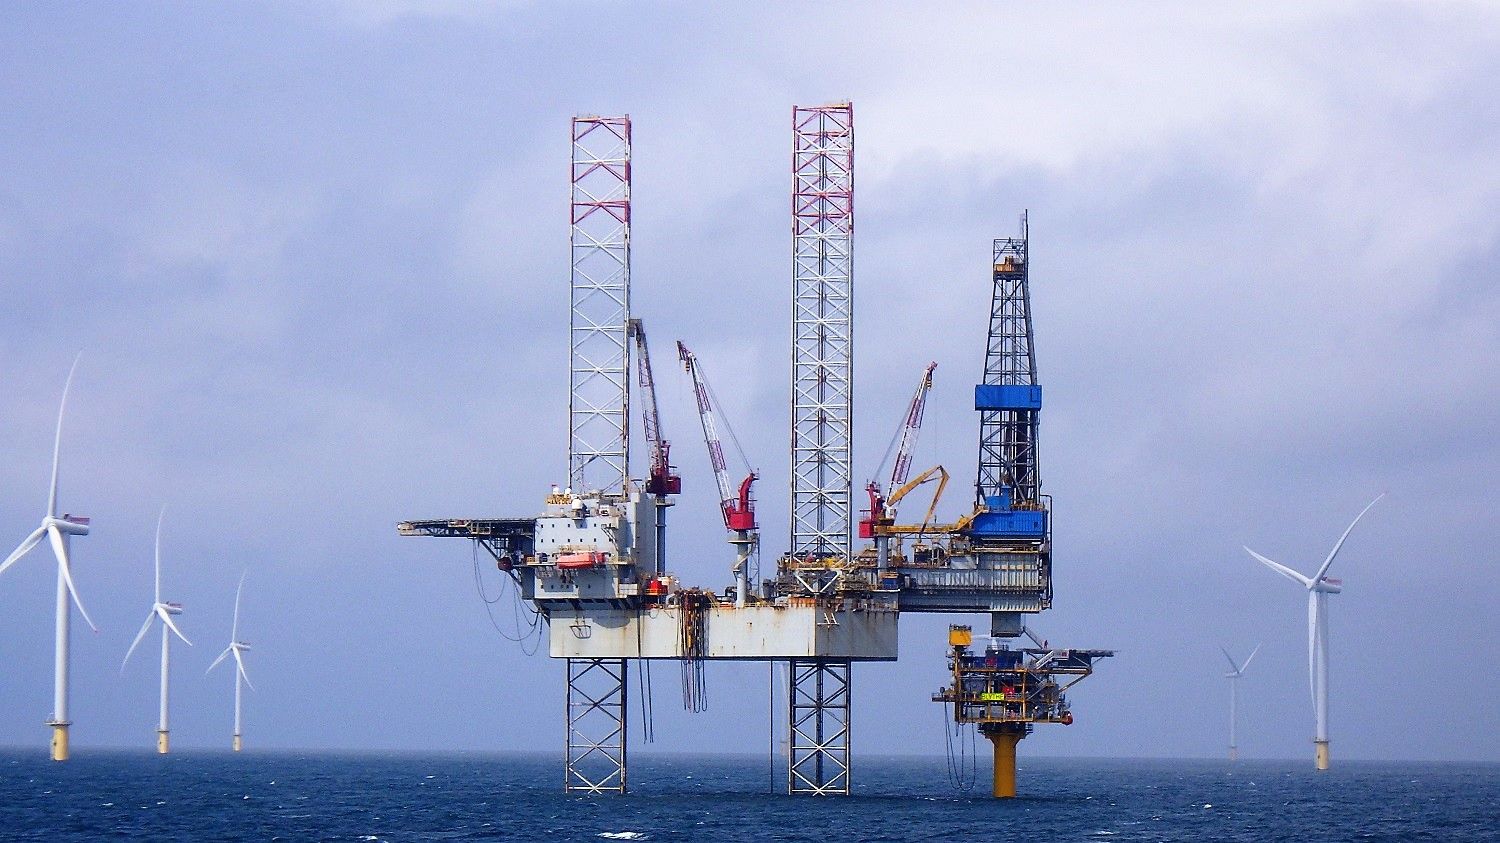 IOG frustrated over another delay in spudding North Sea well